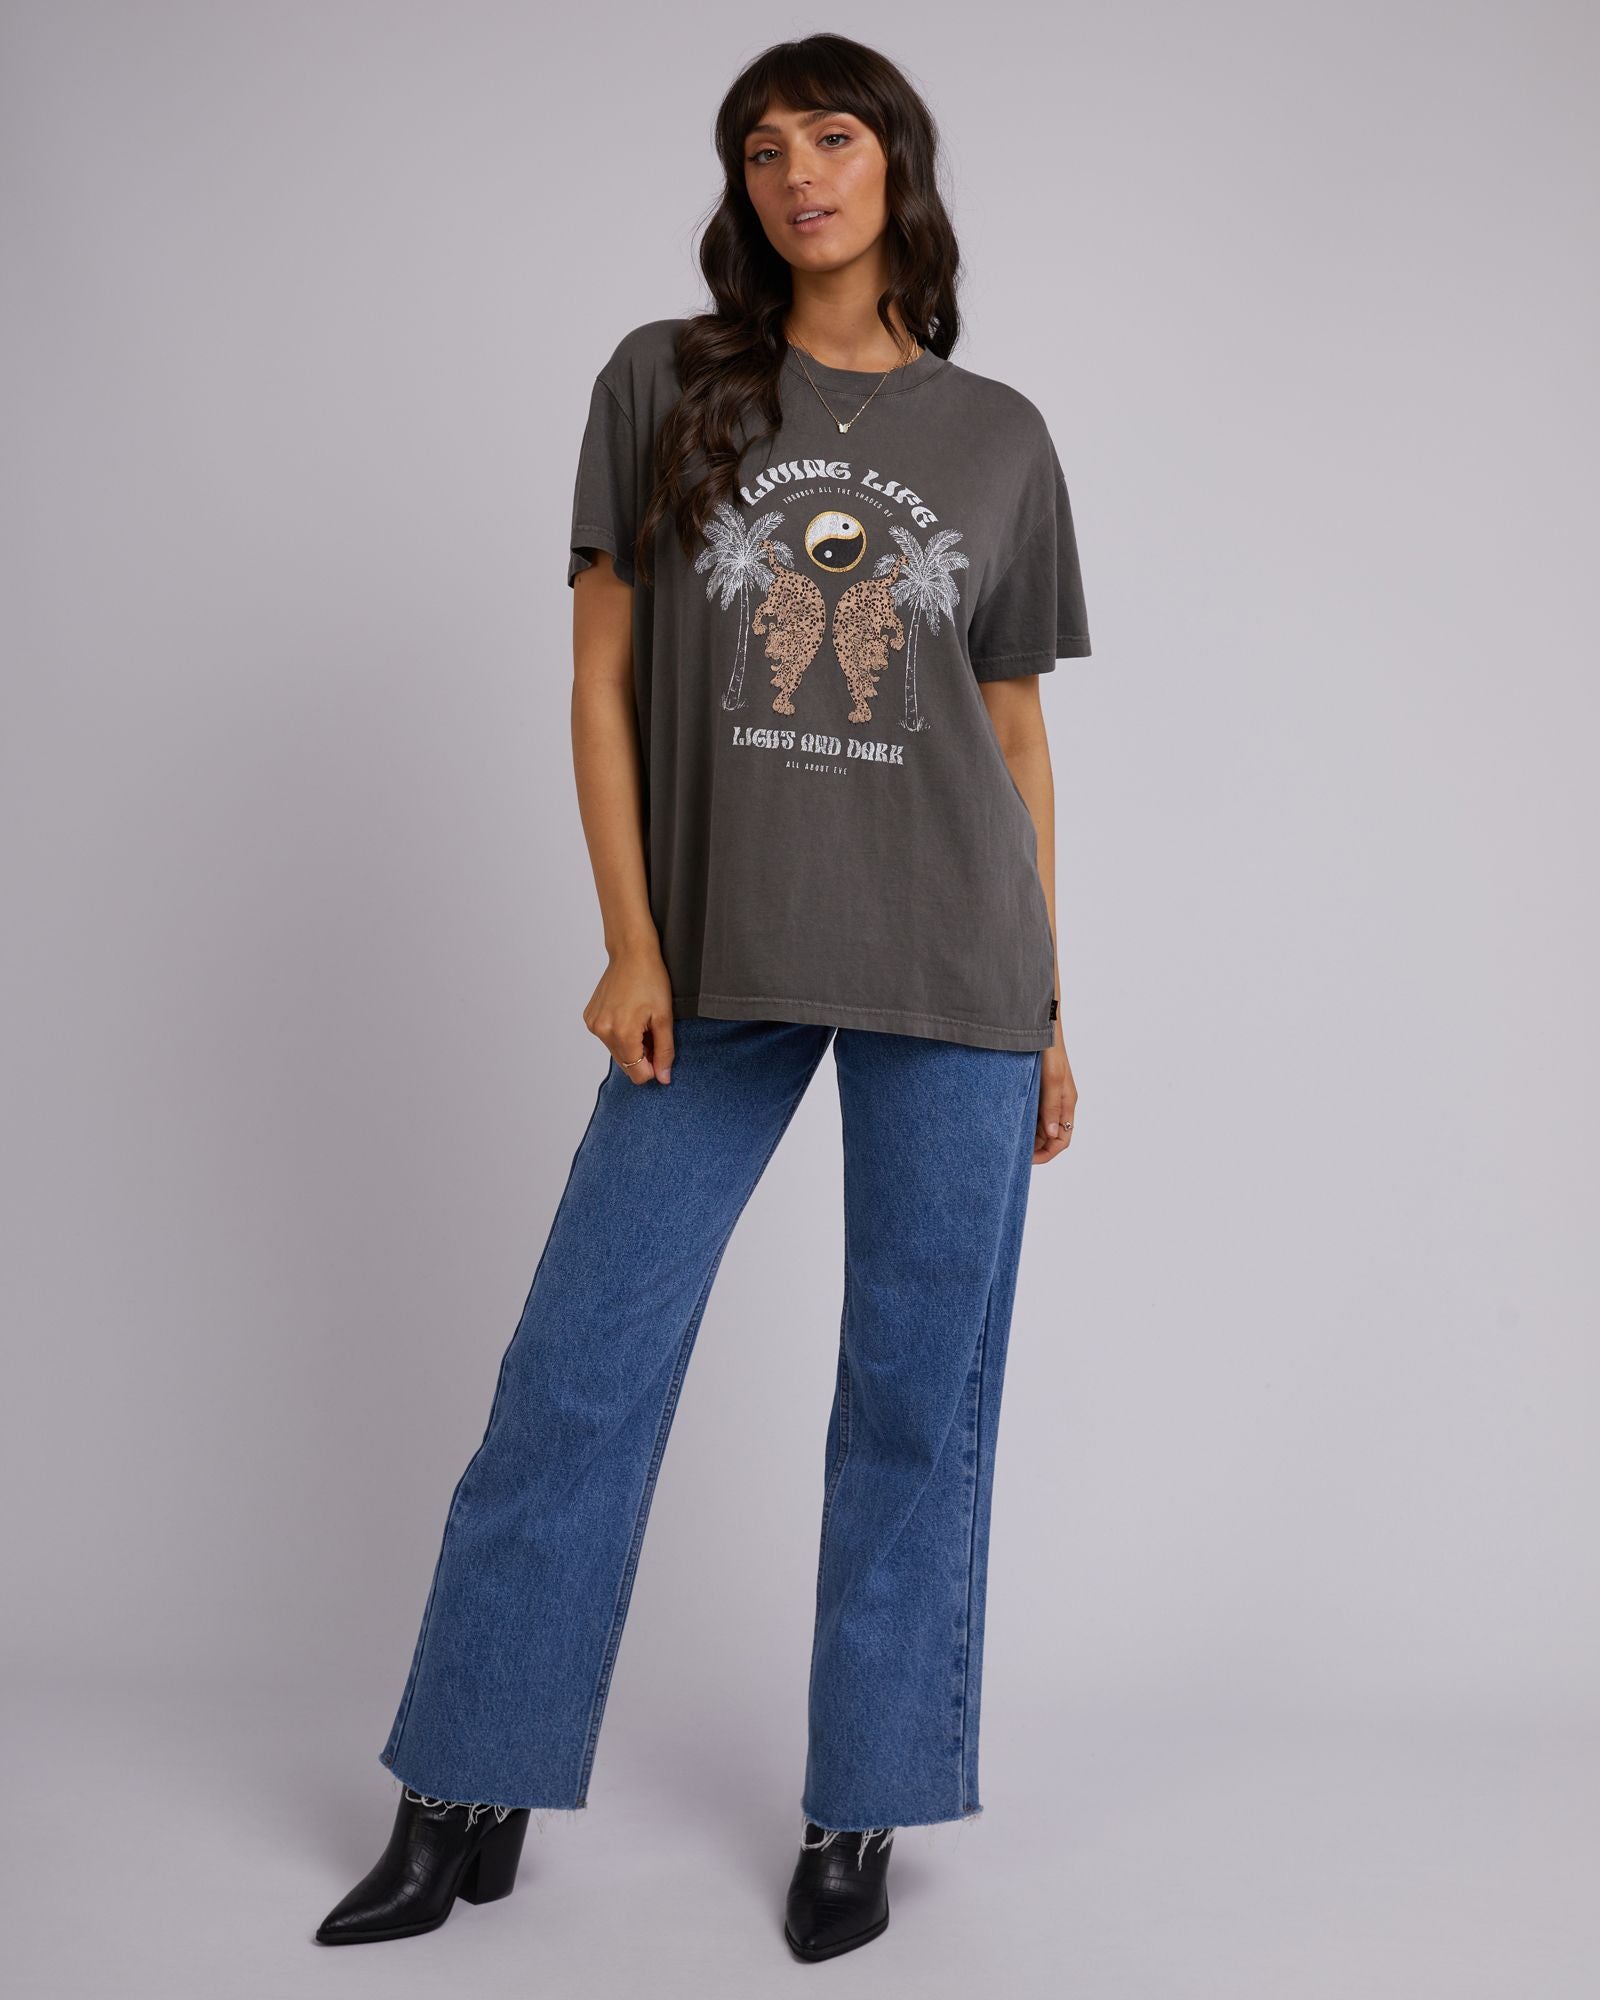 All About Eve Living Life Tee [COLOUR:Washed Charcoal SIZE:6]